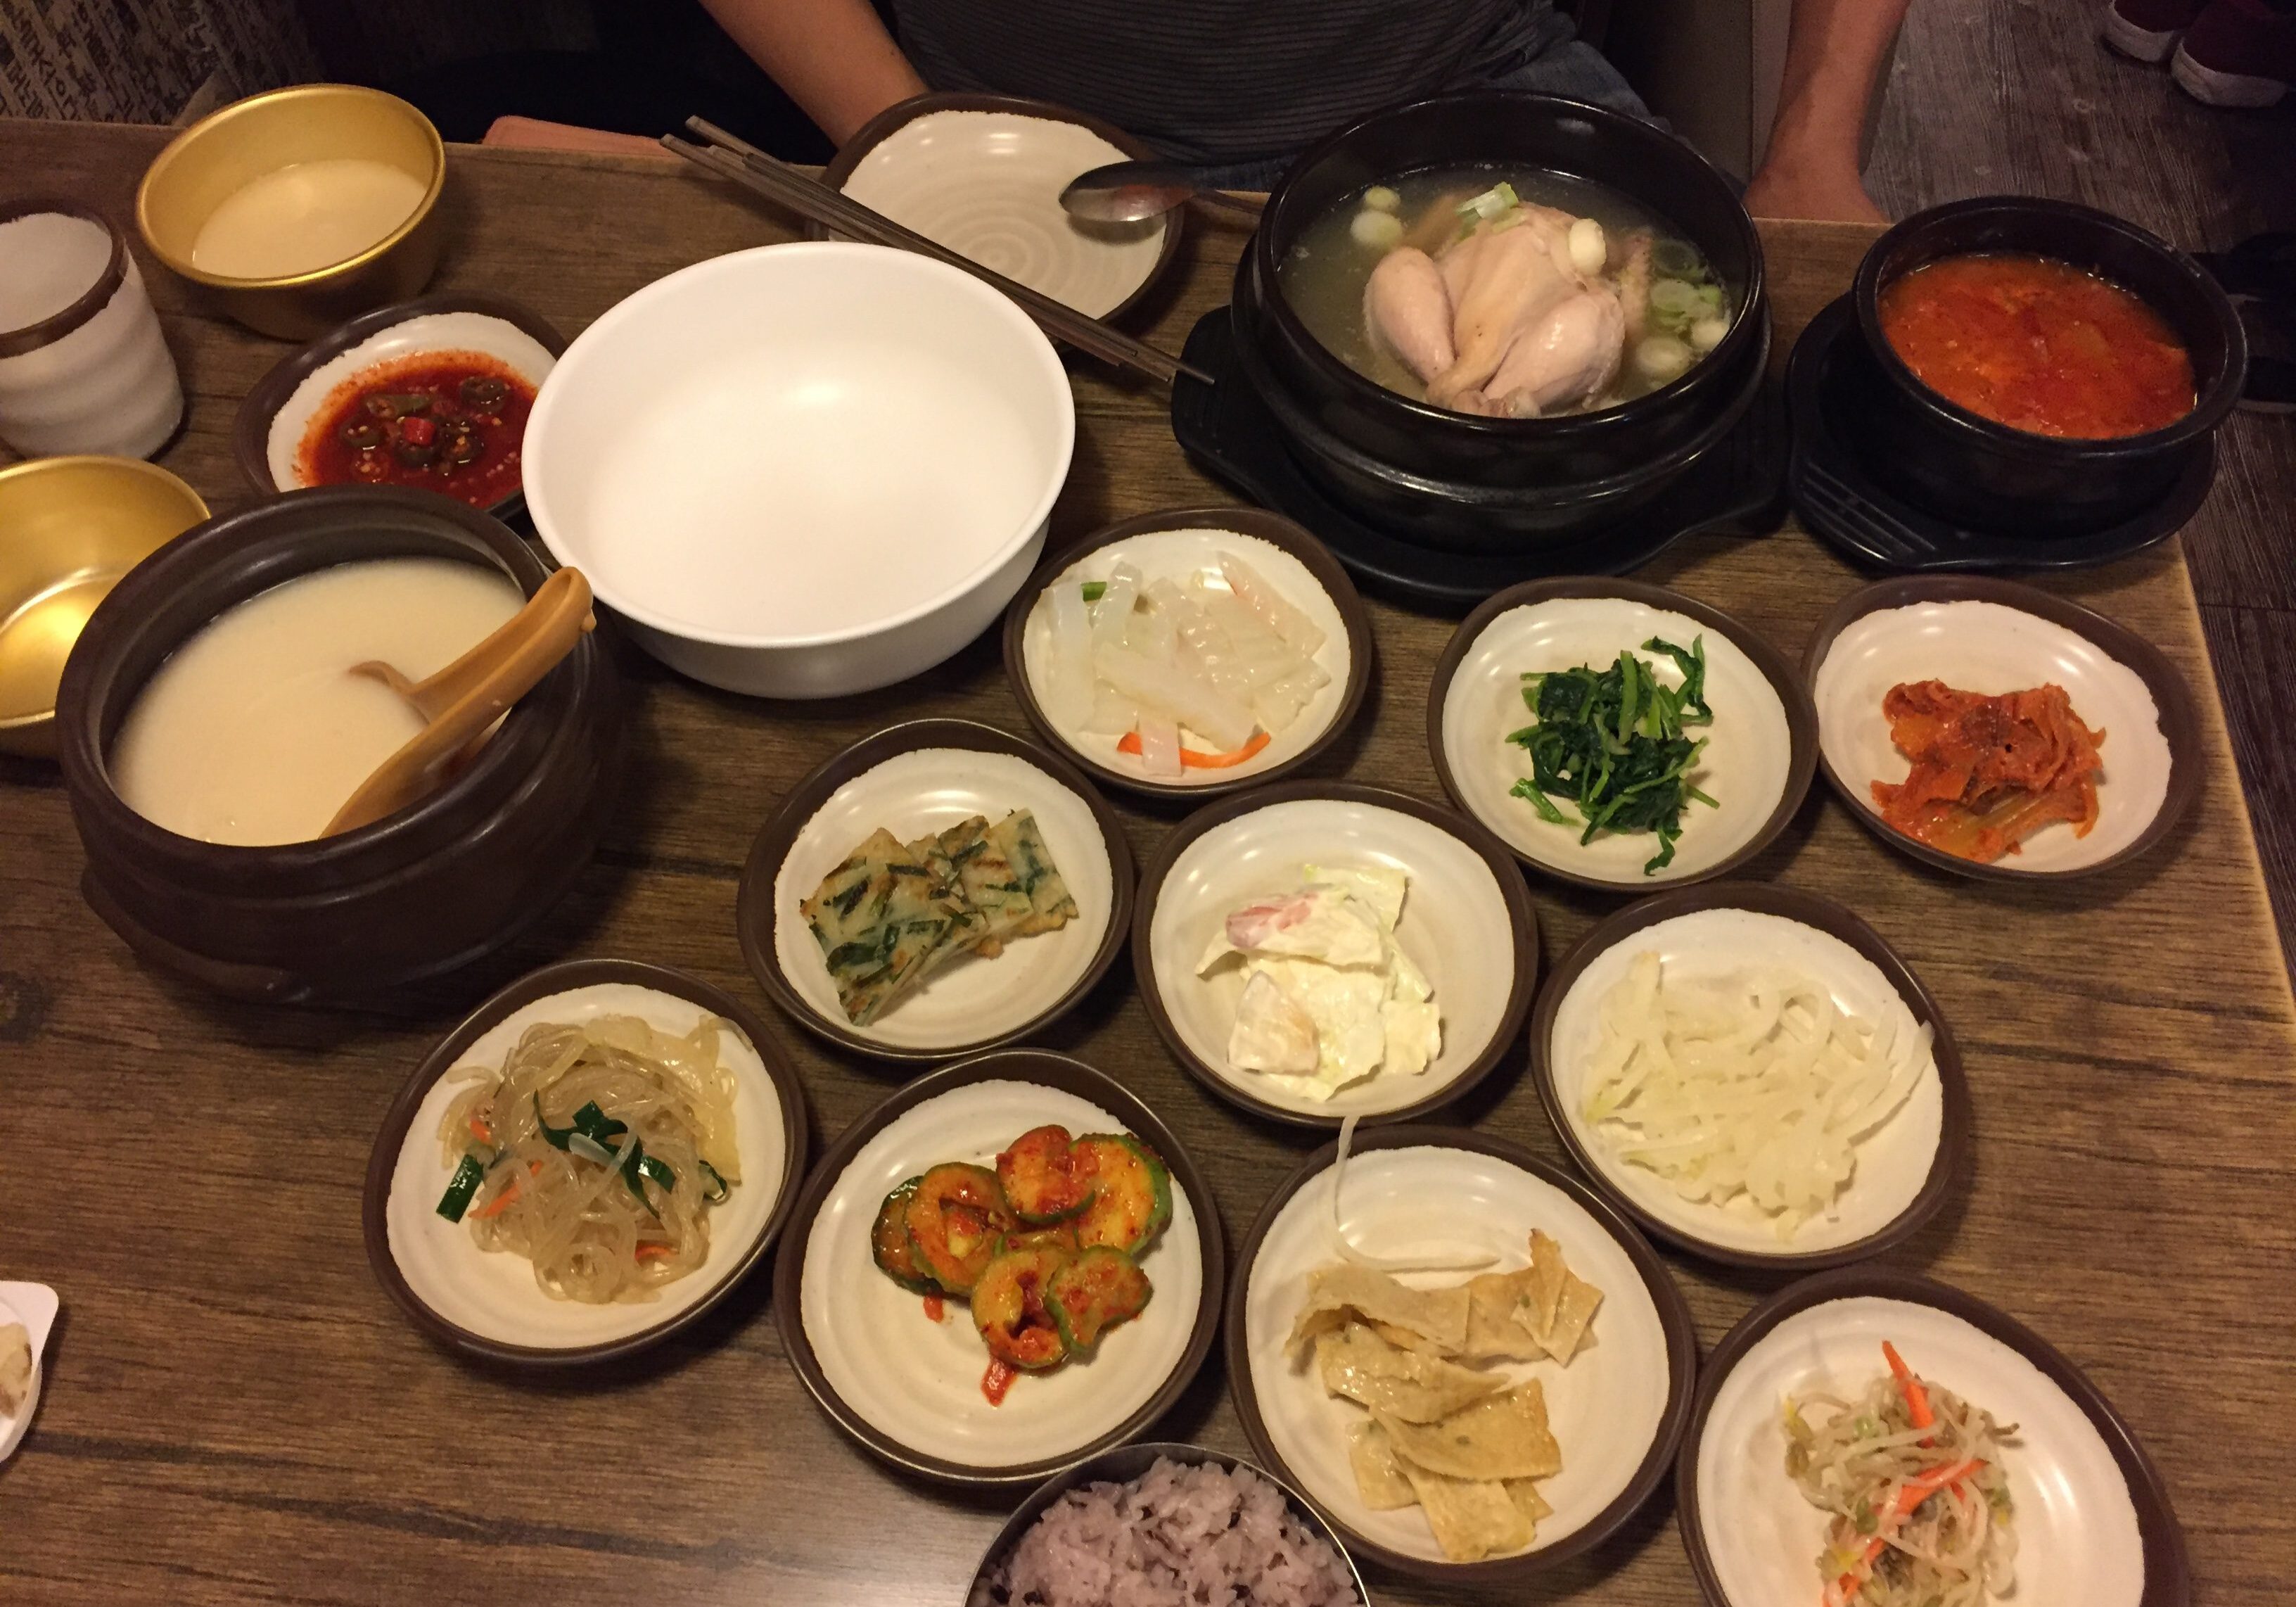 My Traditional Korean Meal! yay!